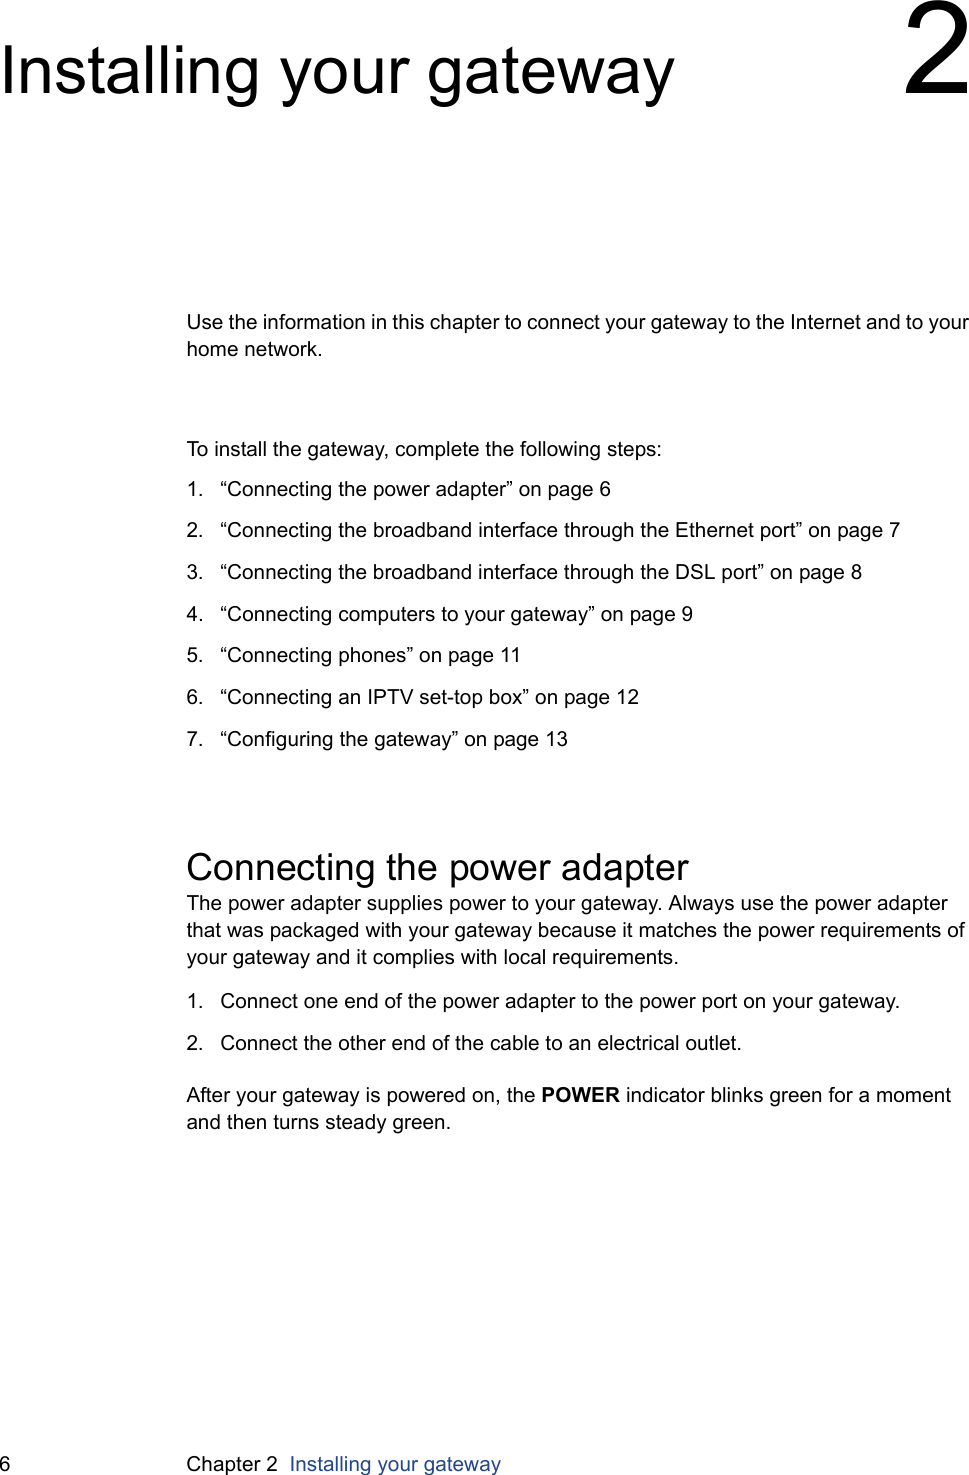 6 Chapter 2  Installing your gatewayInstalling your gateway 2Use the information in this chapter to connect your gateway to the Internet and to your home network.To install the gateway, complete the following steps:1. “Connecting the power adapter” on page 62. “Connecting the broadband interface through the Ethernet port” on page 73. “Connecting the broadband interface through the DSL port” on page 84. “Connecting computers to your gateway” on page 95. “Connecting phones” on page 116. “Connecting an IPTV set-top box” on page 127. “Configuring the gateway” on page 13Connecting the power adapterThe power adapter supplies power to your gateway. Always use the power adapter that was packaged with your gateway because it matches the power requirements of your gateway and it complies with local requirements.1. Connect one end of the power adapter to the power port on your gateway.2. Connect the other end of the cable to an electrical outlet.After your gateway is powered on, the POWER indicator blinks green for a moment and then turns steady green.